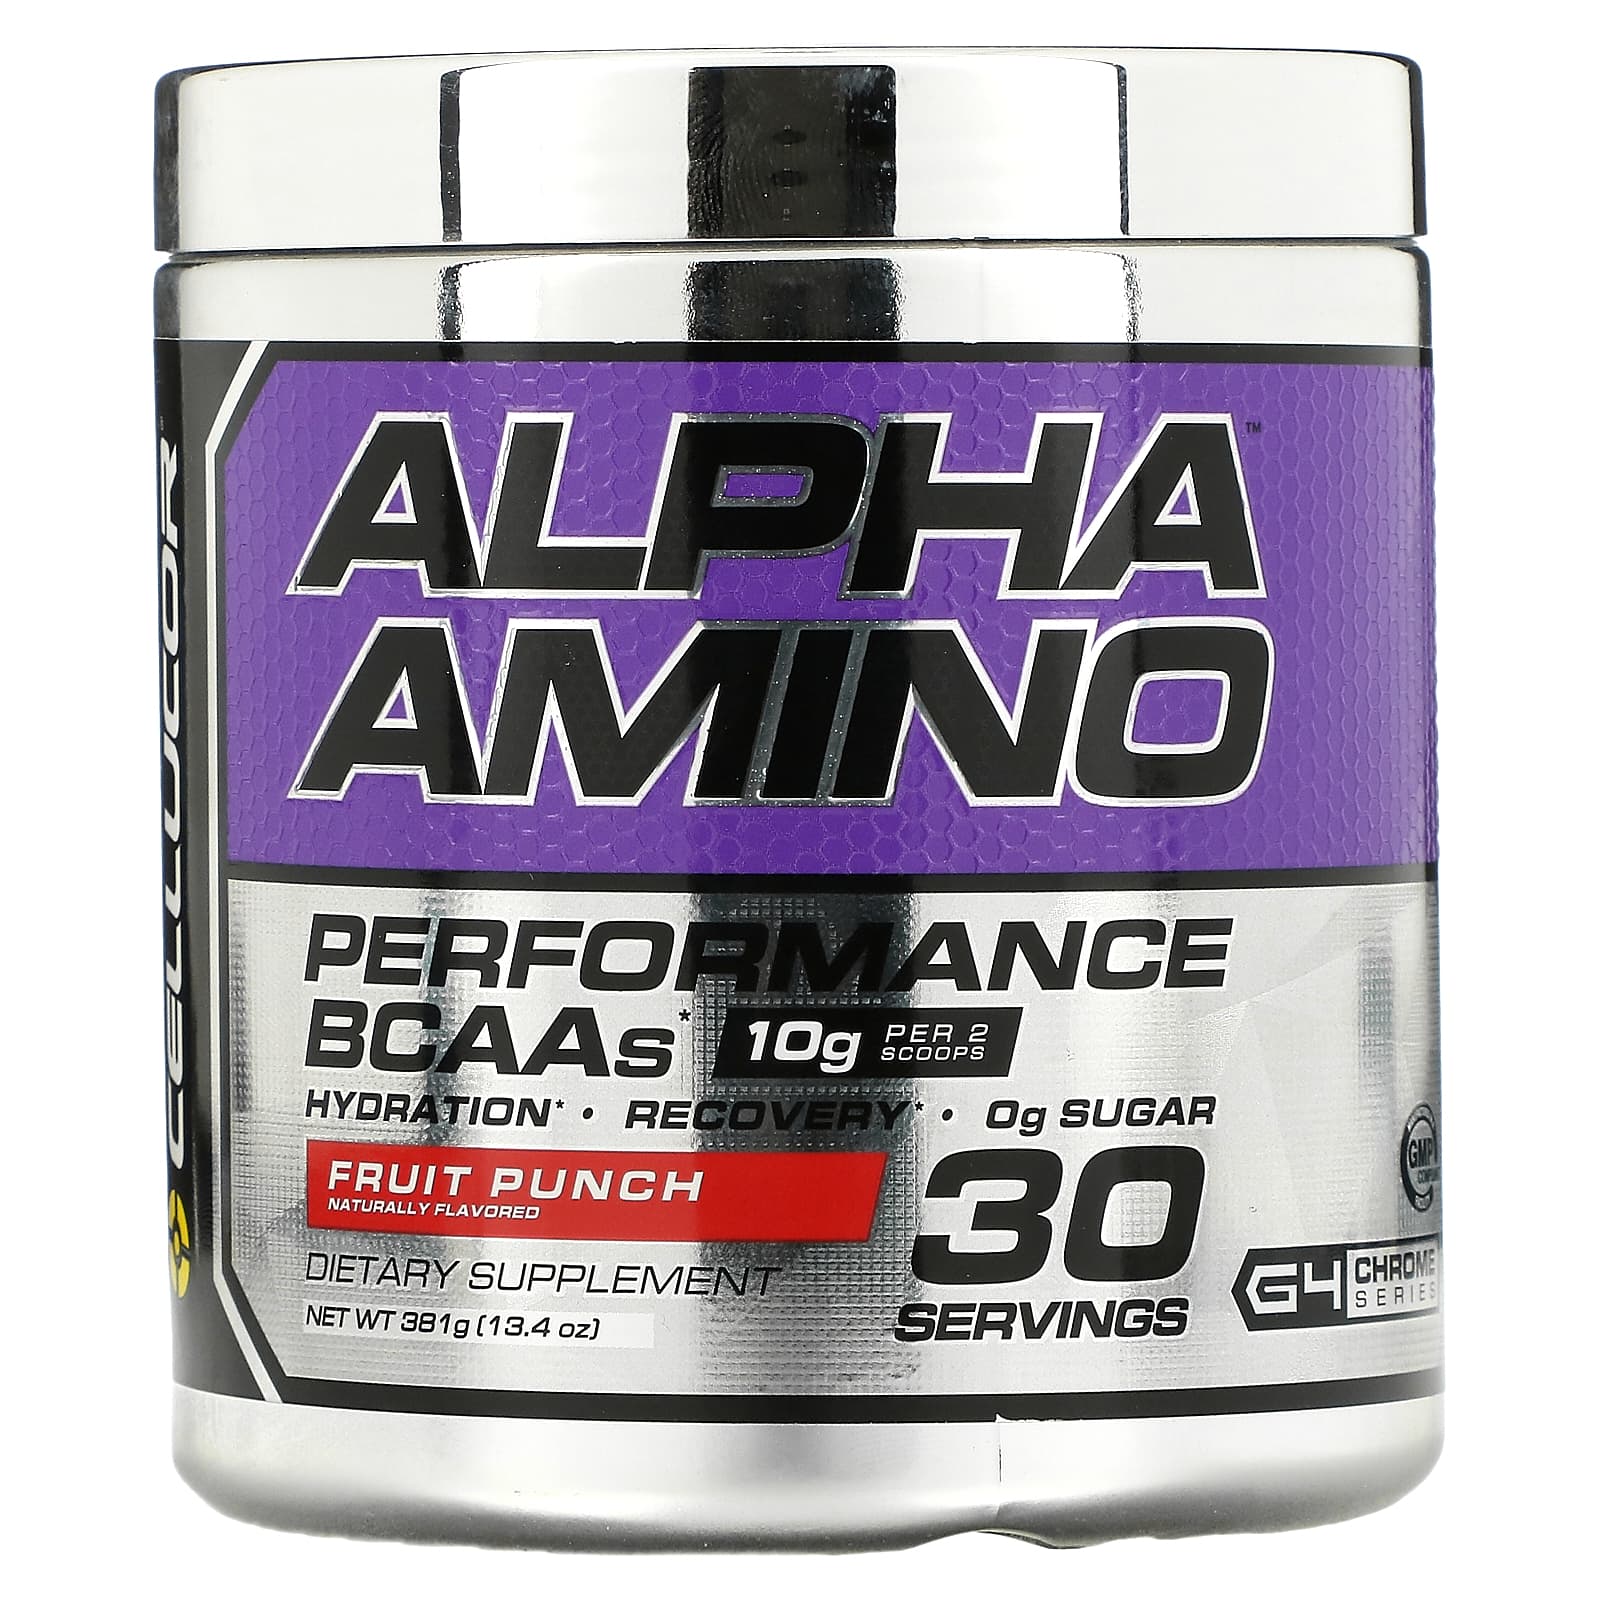 Cellucor, Alpha Amino, Performance BCAAs, Fruit Punch